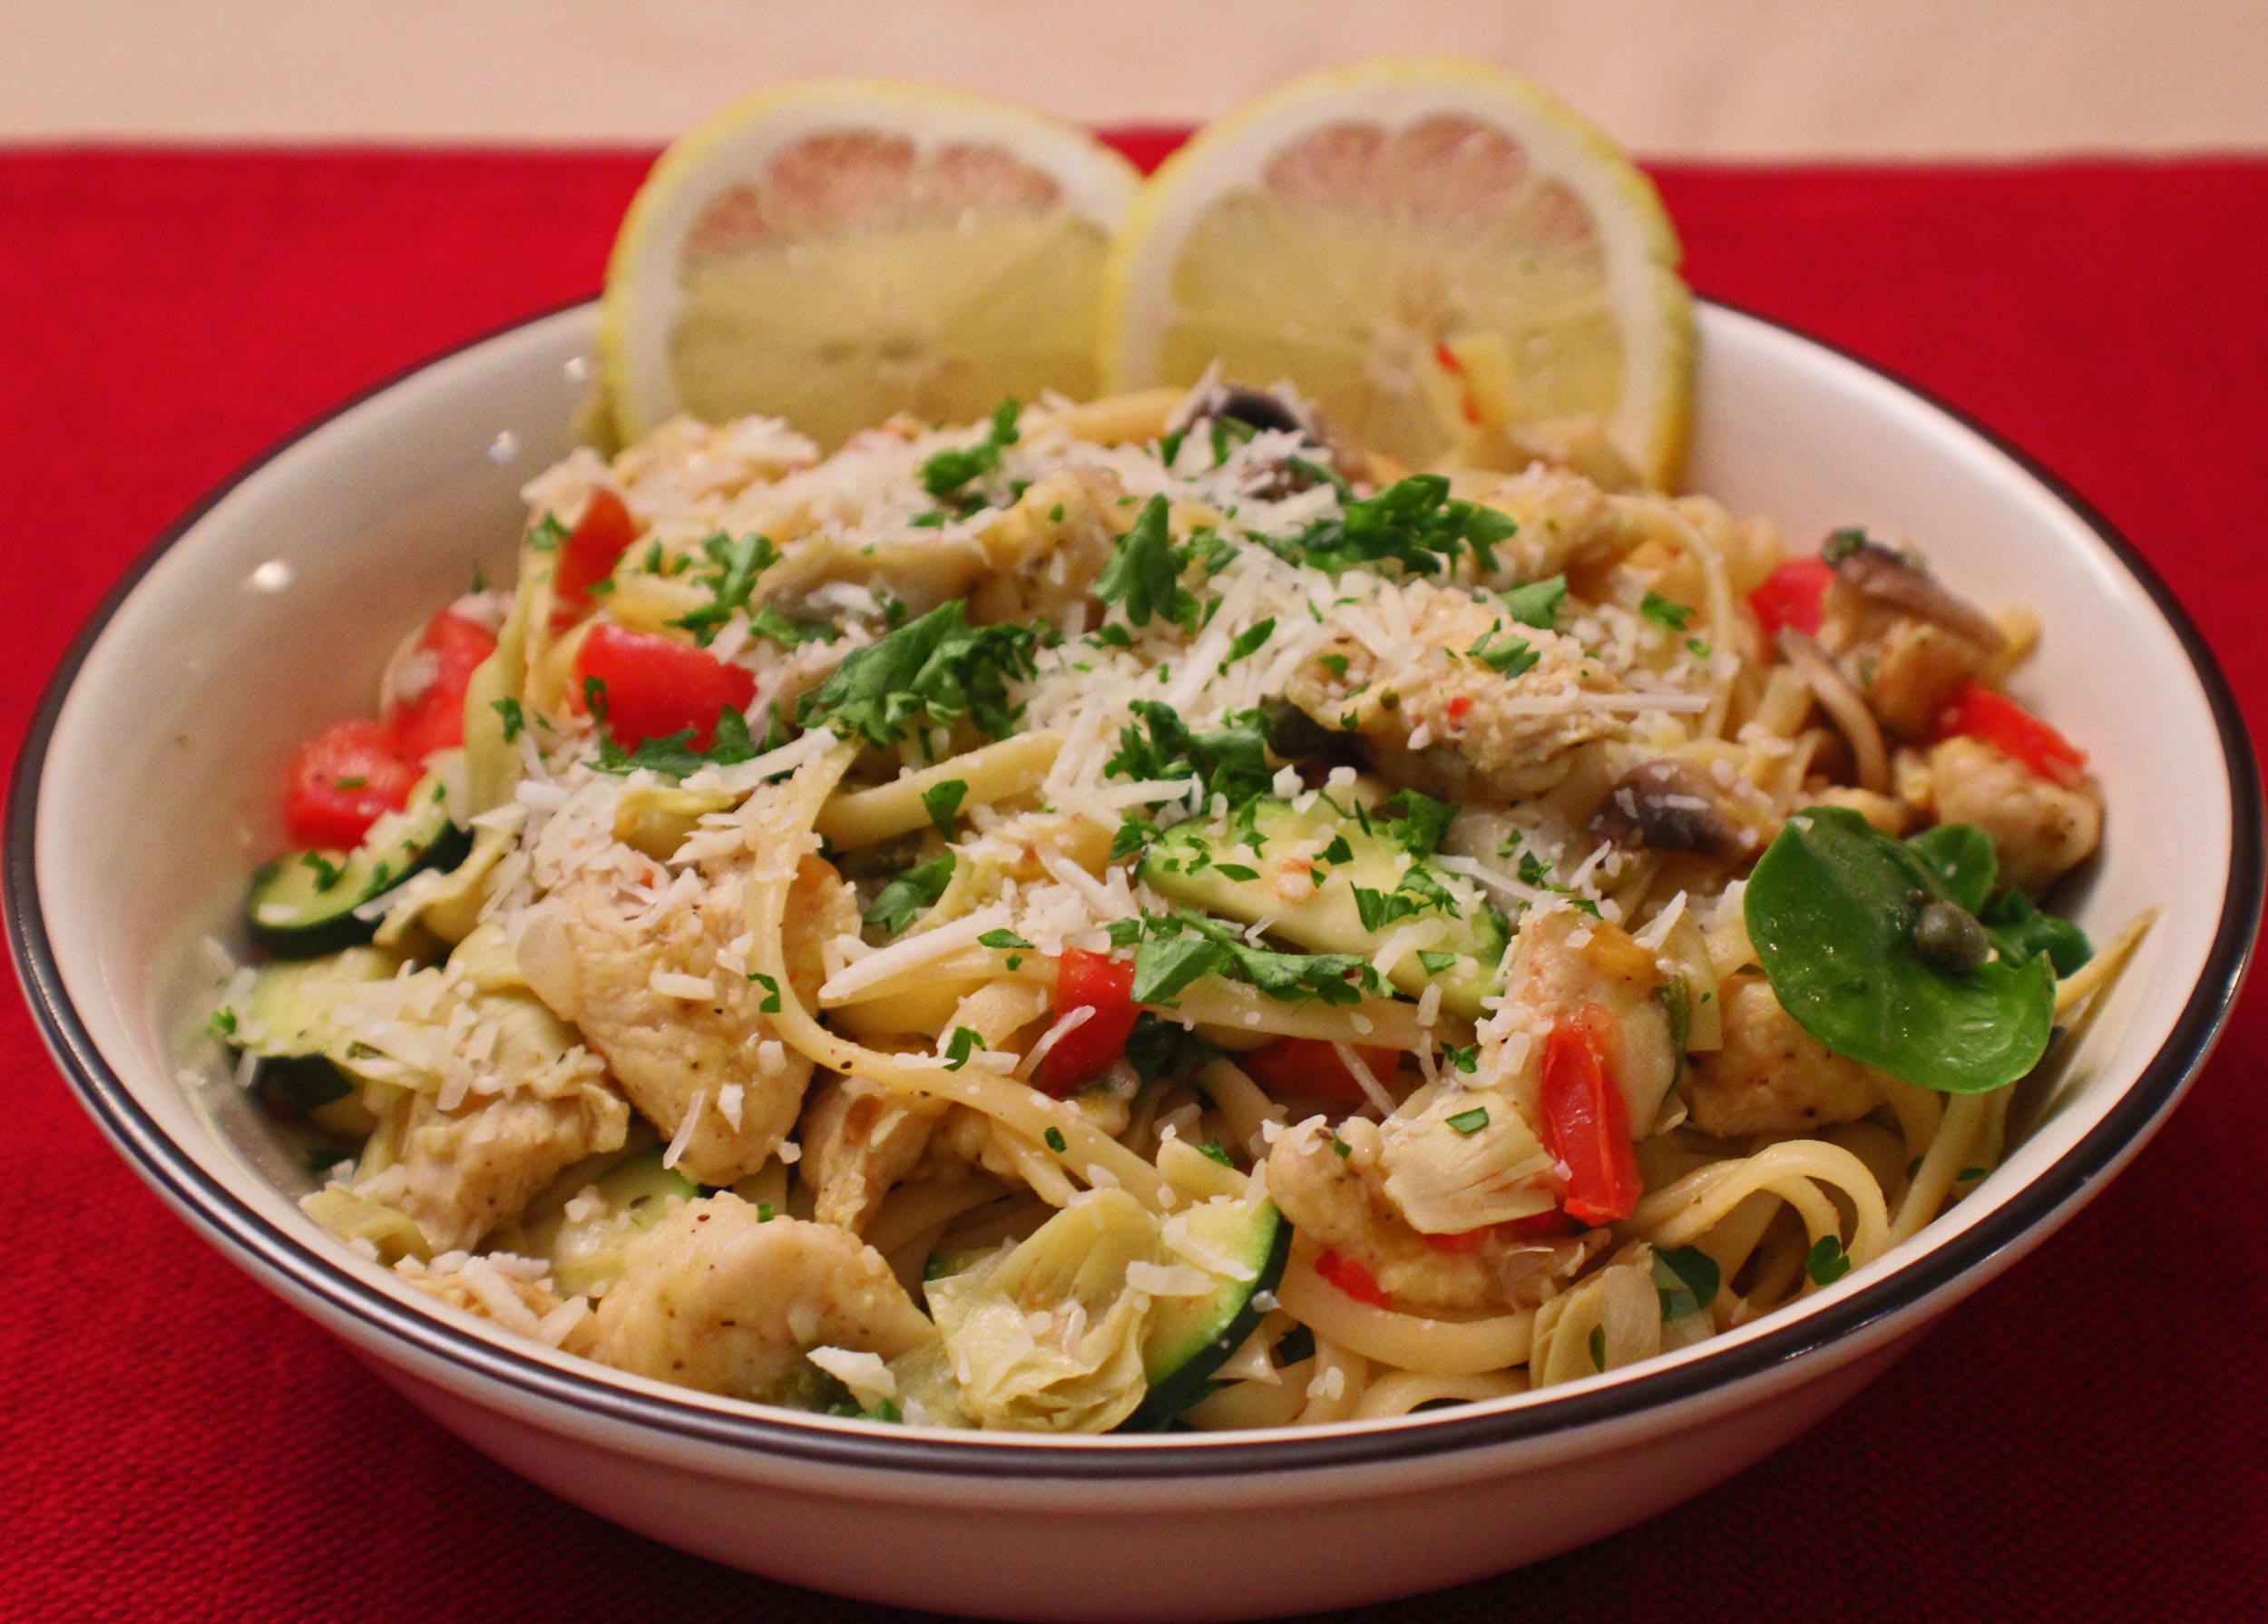 Lemon Pepper Linguini with Chicken and Veggies